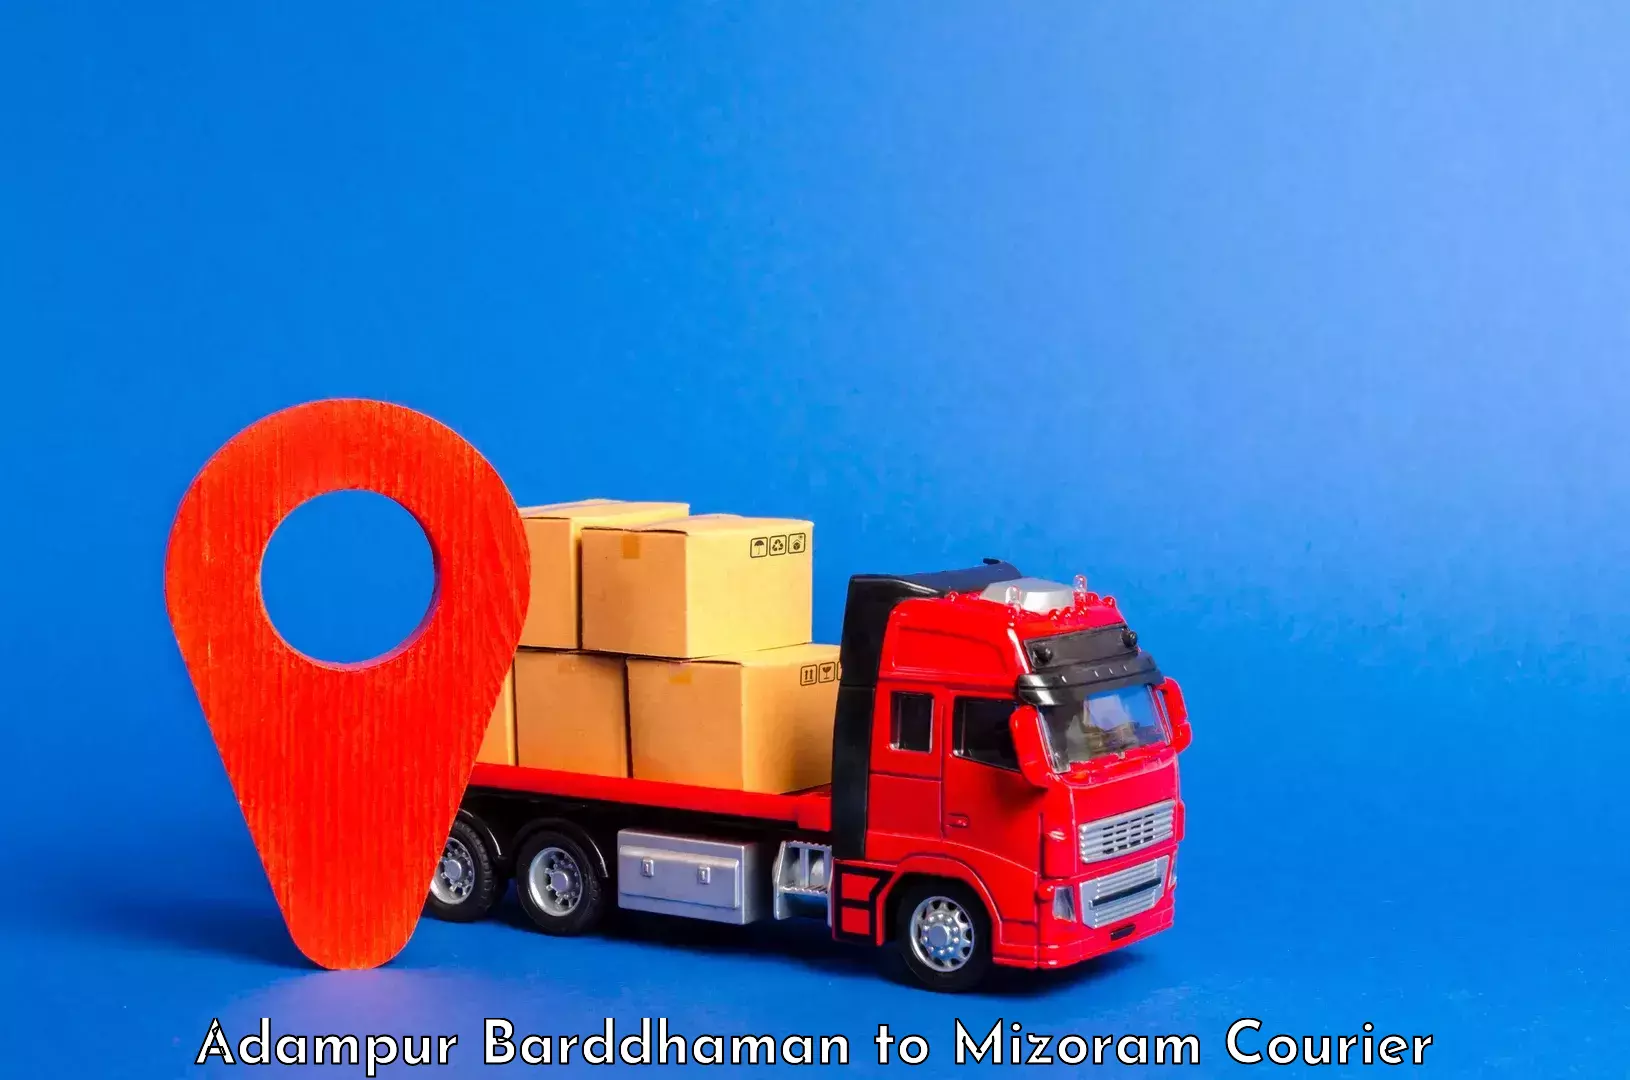 Baggage delivery technology Adampur Barddhaman to Mizoram